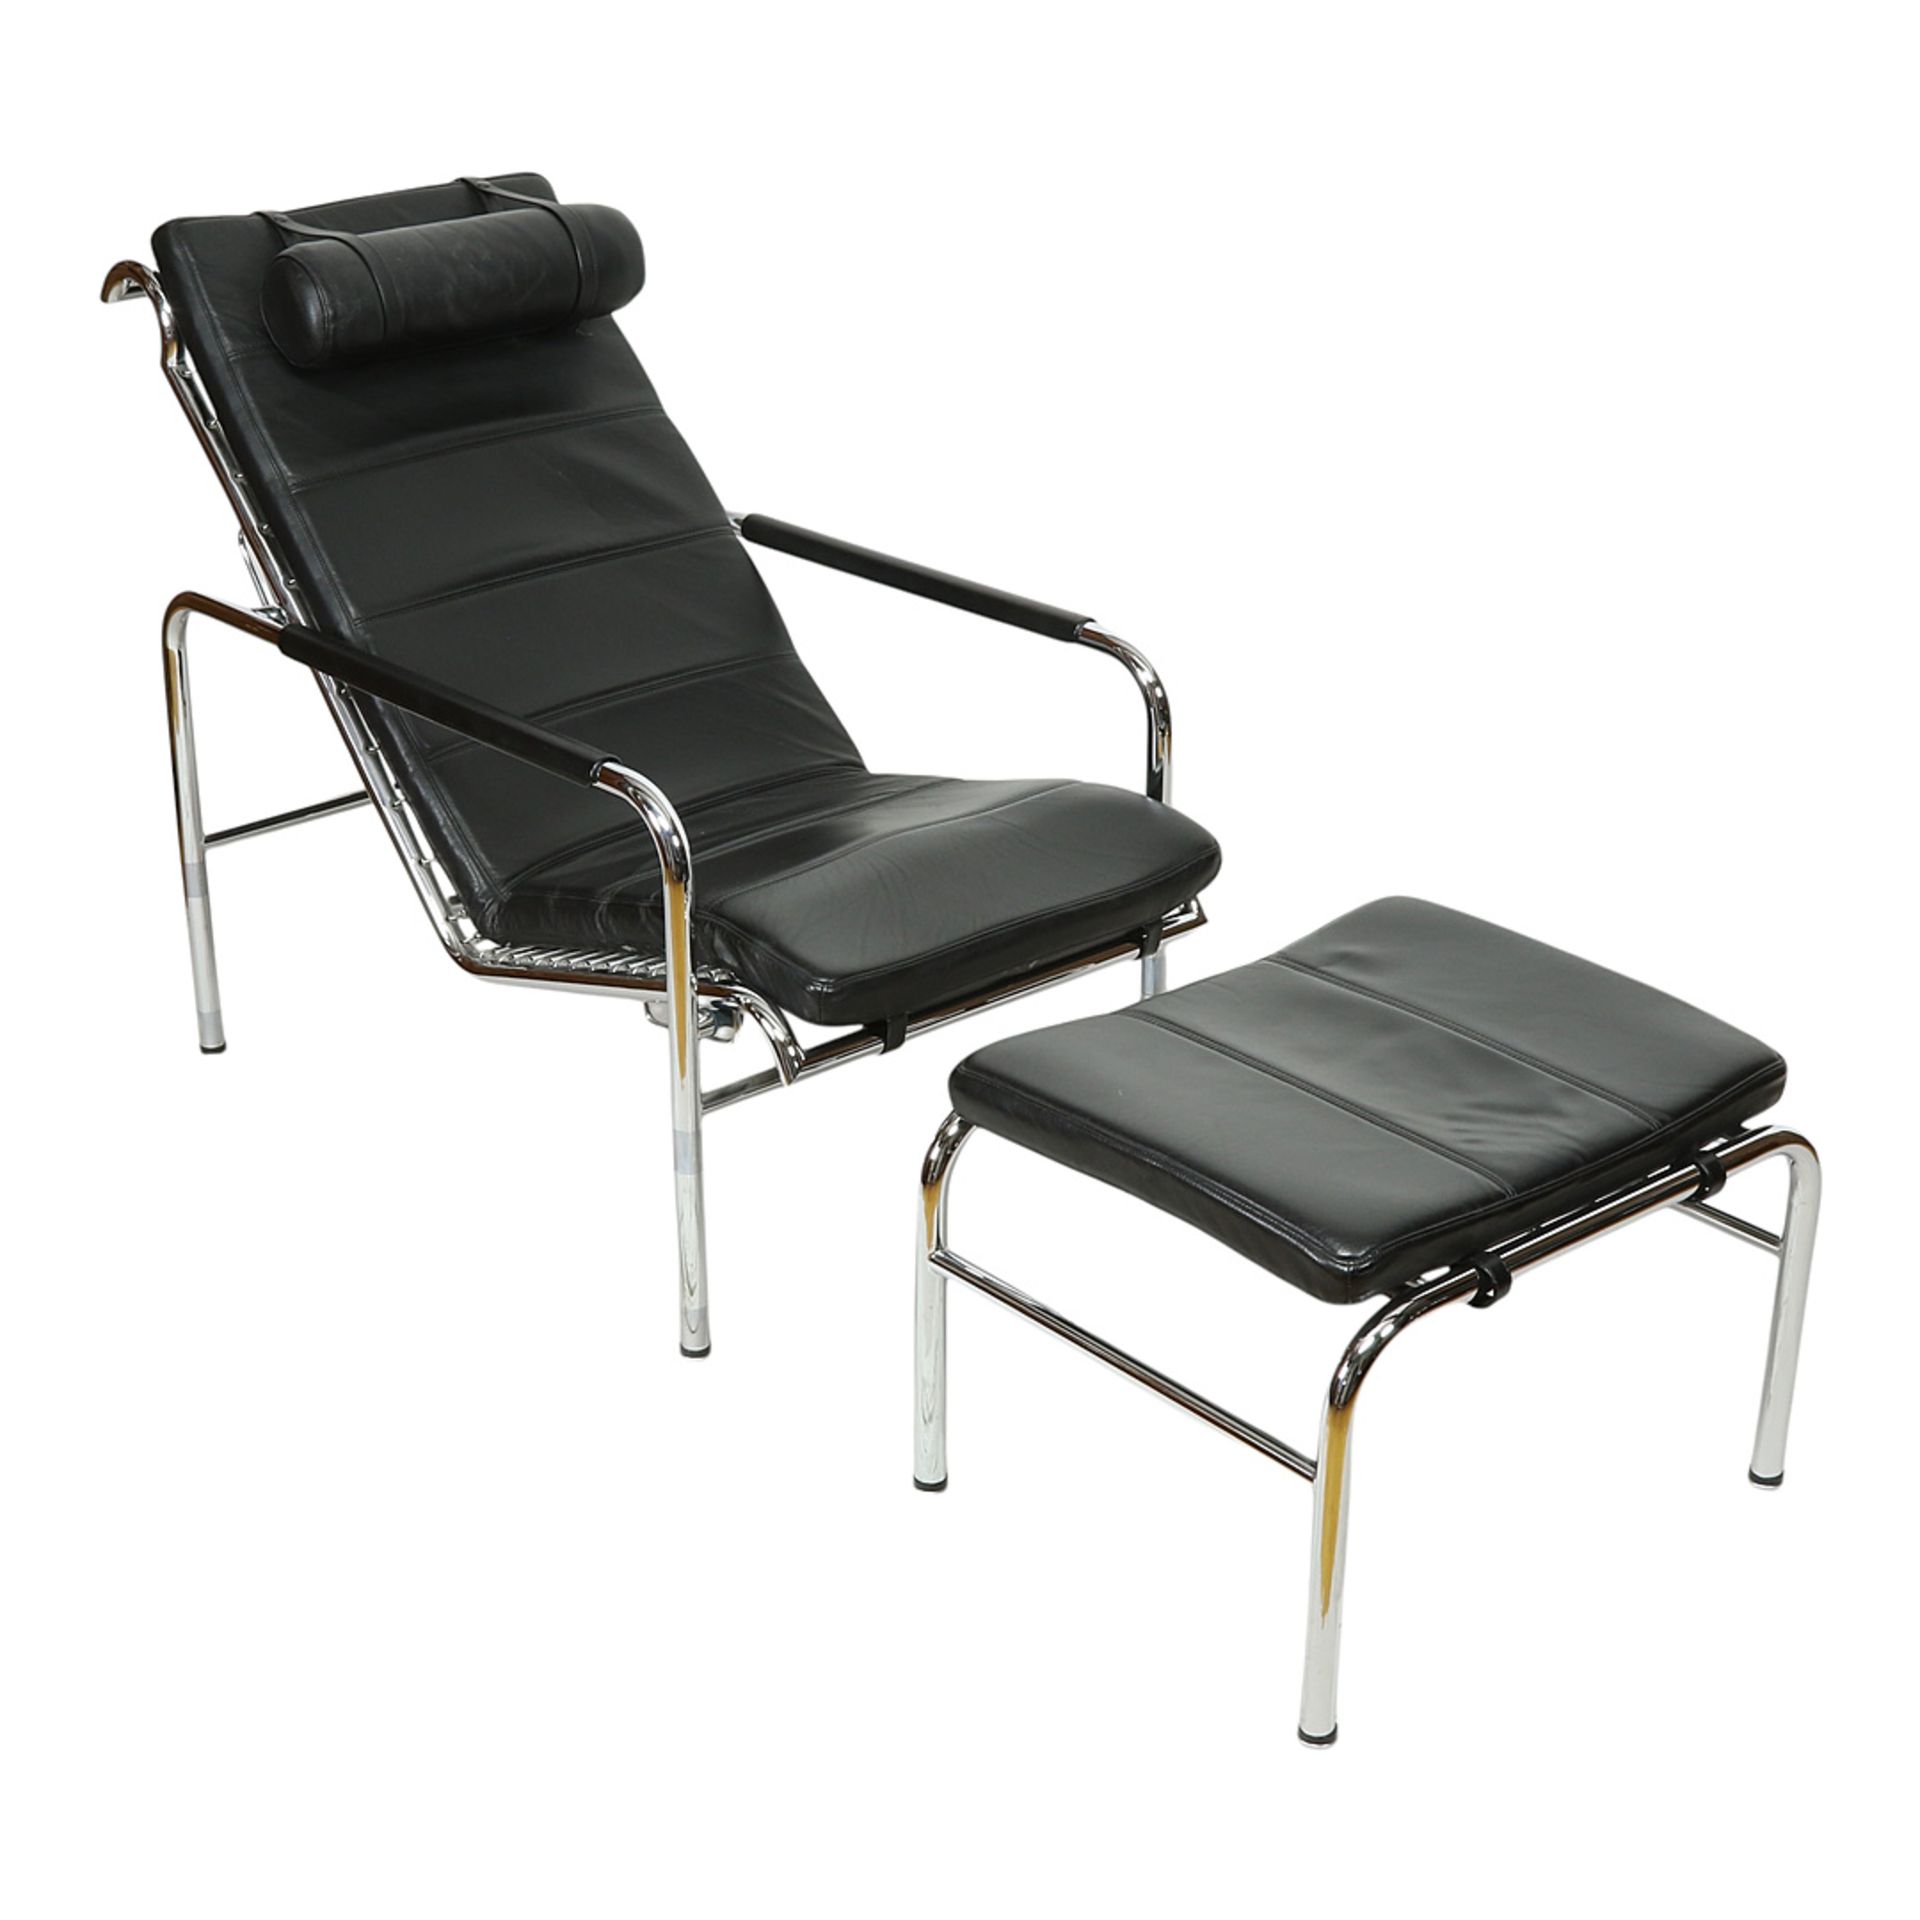 Chaise longue with stool, chrome-plated steel, black leather cover